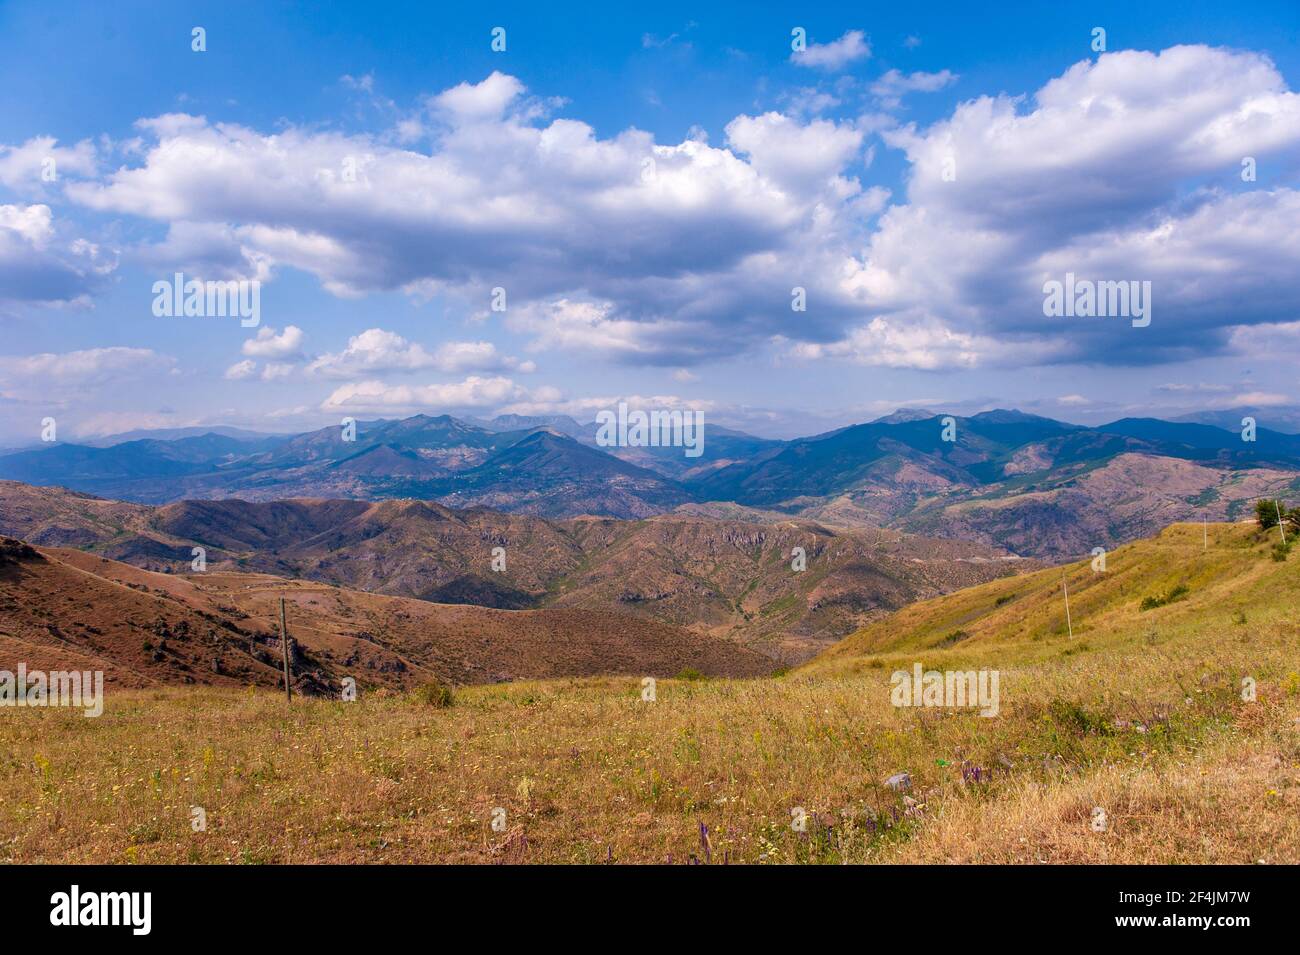 Scenic landscape of mountain ranges in the south of Armenia, Syunik province, with dramatic clouds Stock Photo